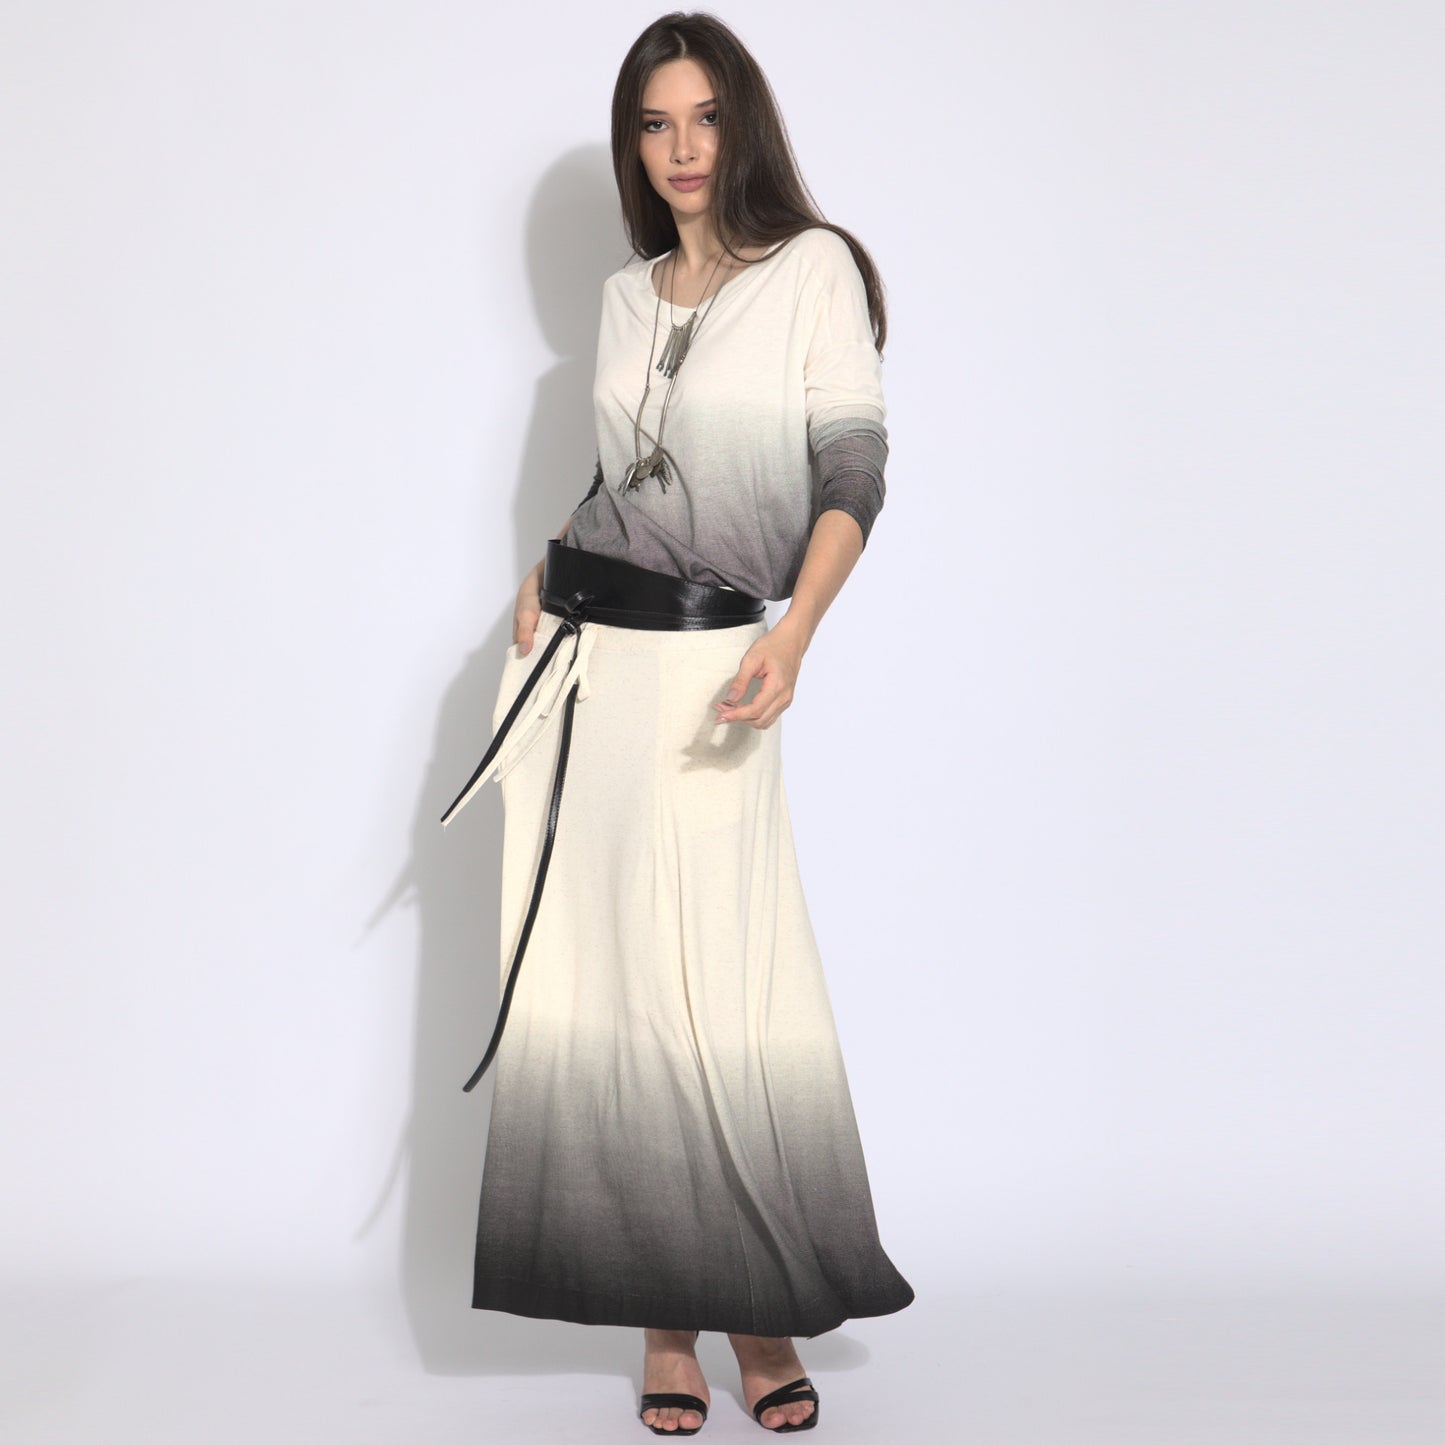 Aysha - Oversize blouse in off-white to black gradient effect